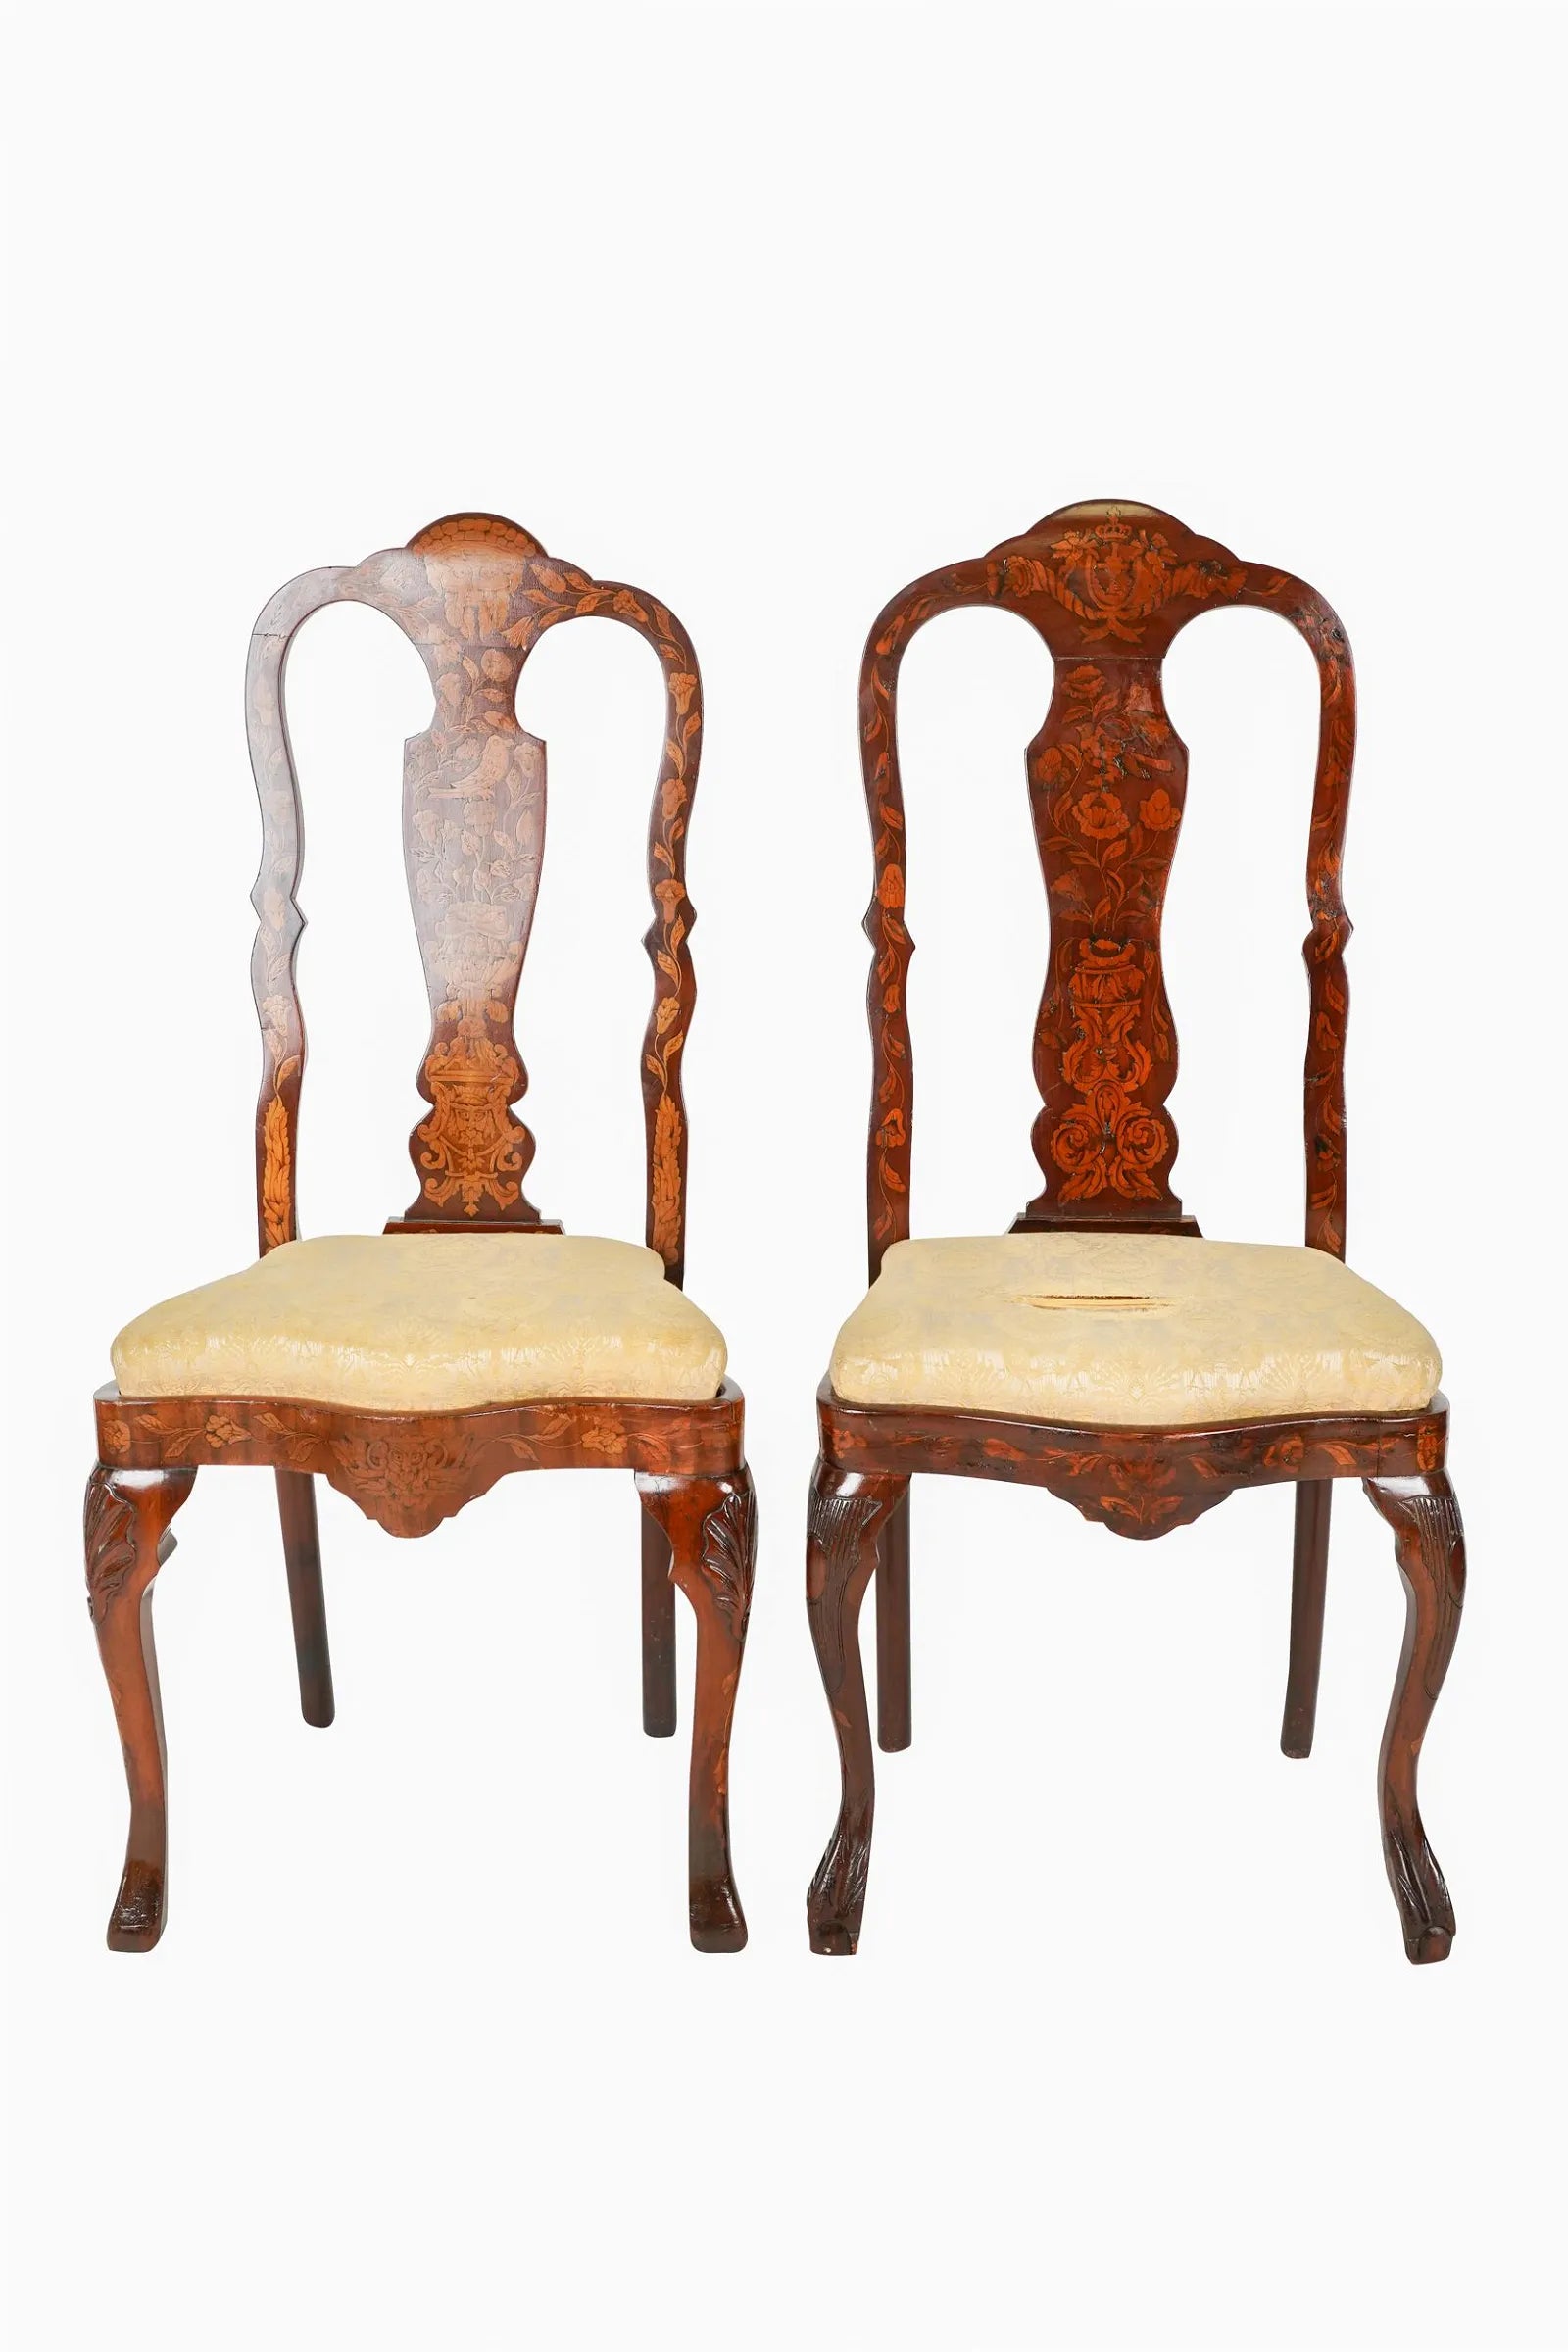 AF2-029: ANTIQUE PAIR OF 18tH CENTURY DUTCH MARQUETRY SIDE CHAIRS